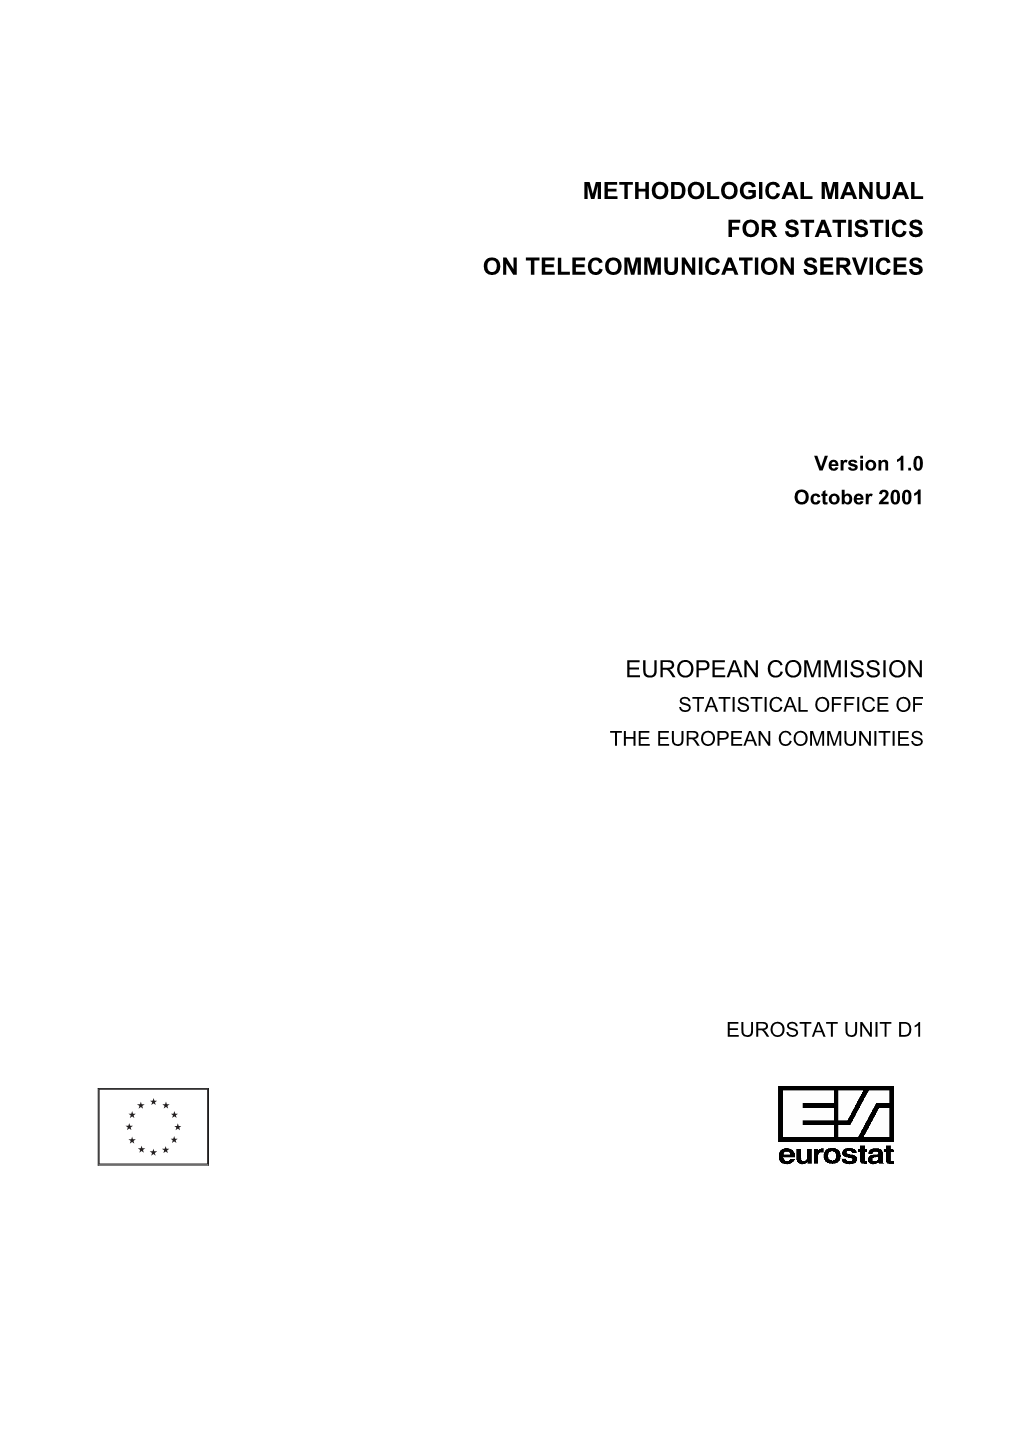 Methodological Manual for Statistics on Telecommunication Services